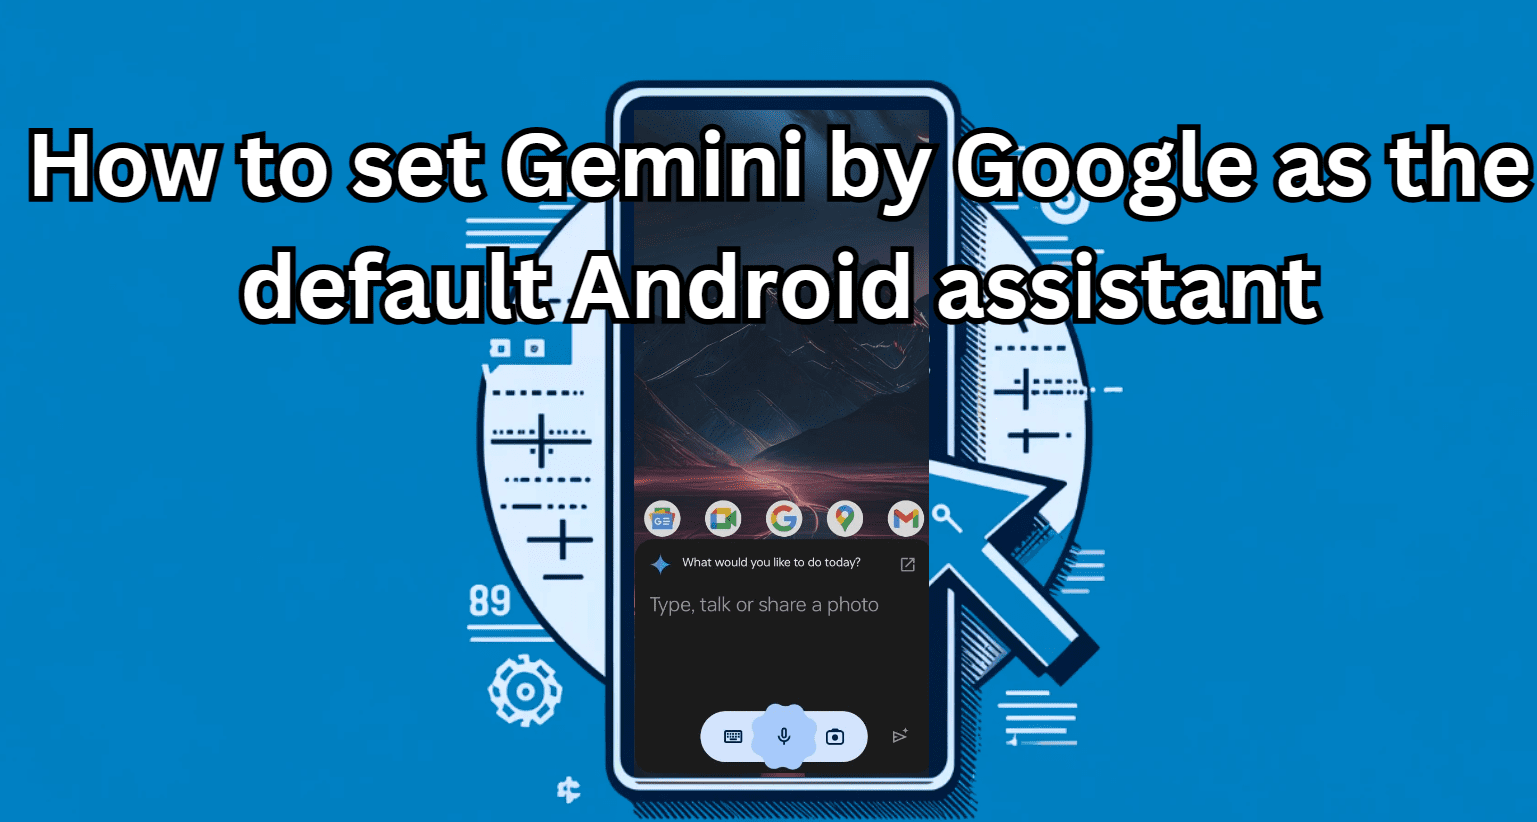 set Gemini by Google as the default Android assistant